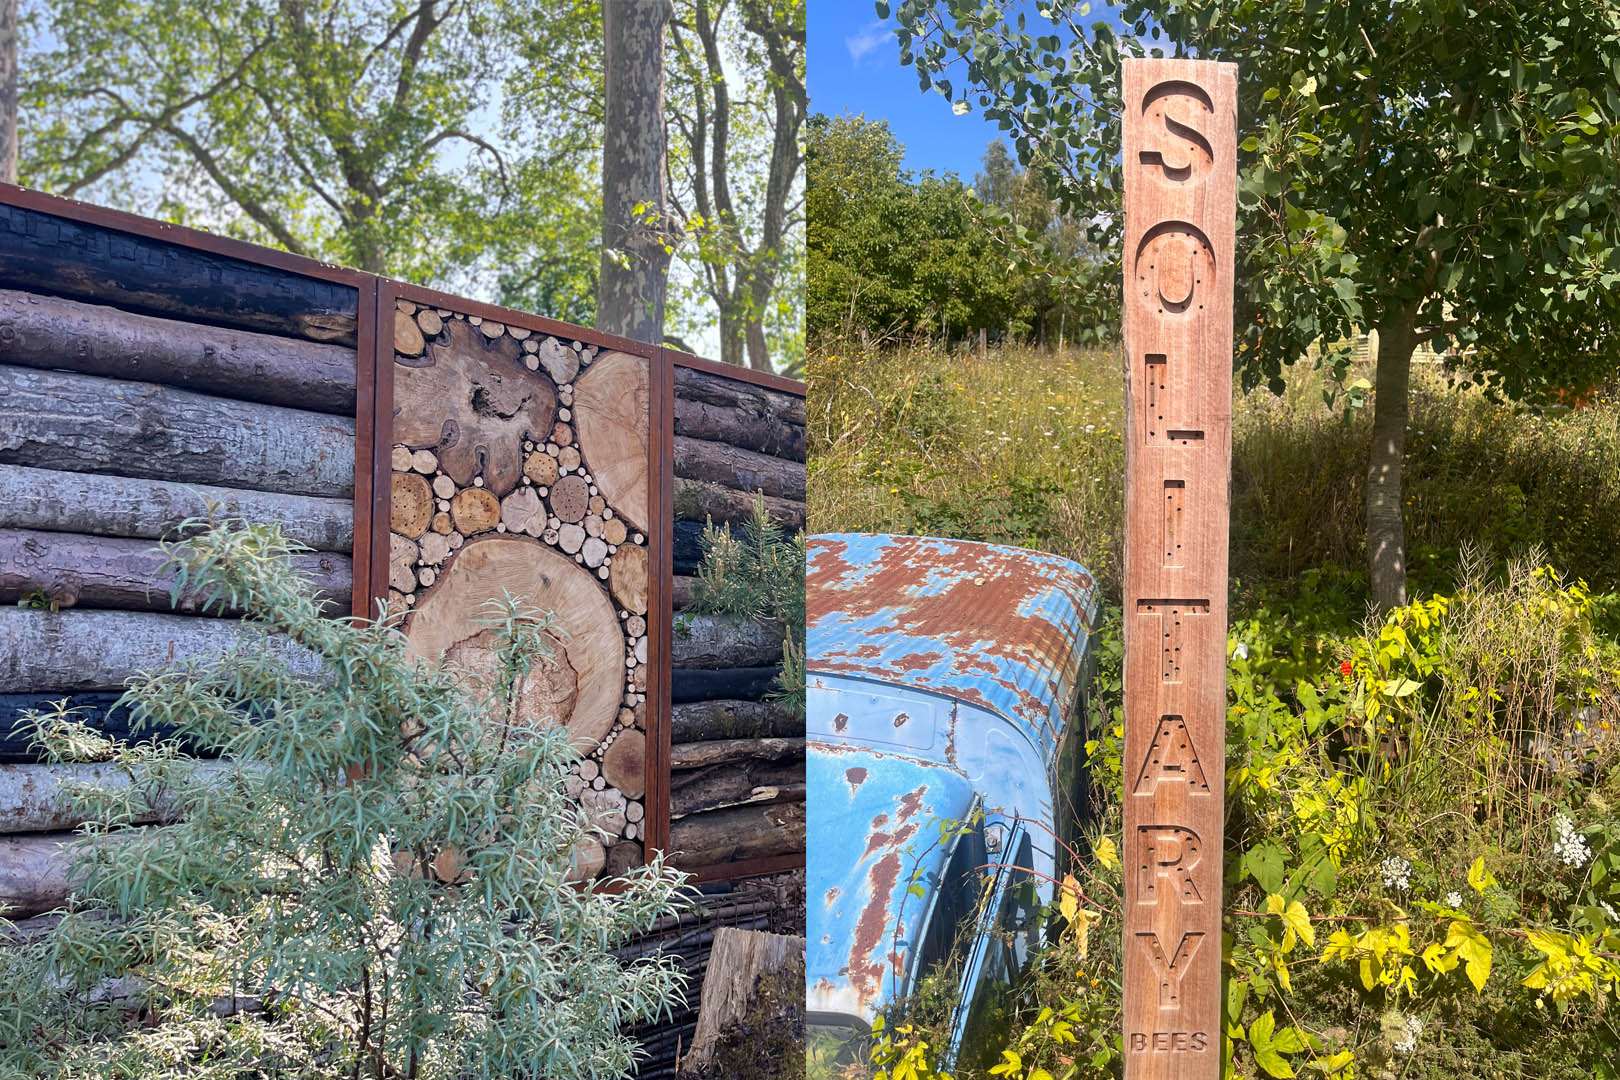 Two examples of insect habitats, one is a decorative panel made of stacked logs, the other is a wayfinding sign with holes created for solitary bee nesting